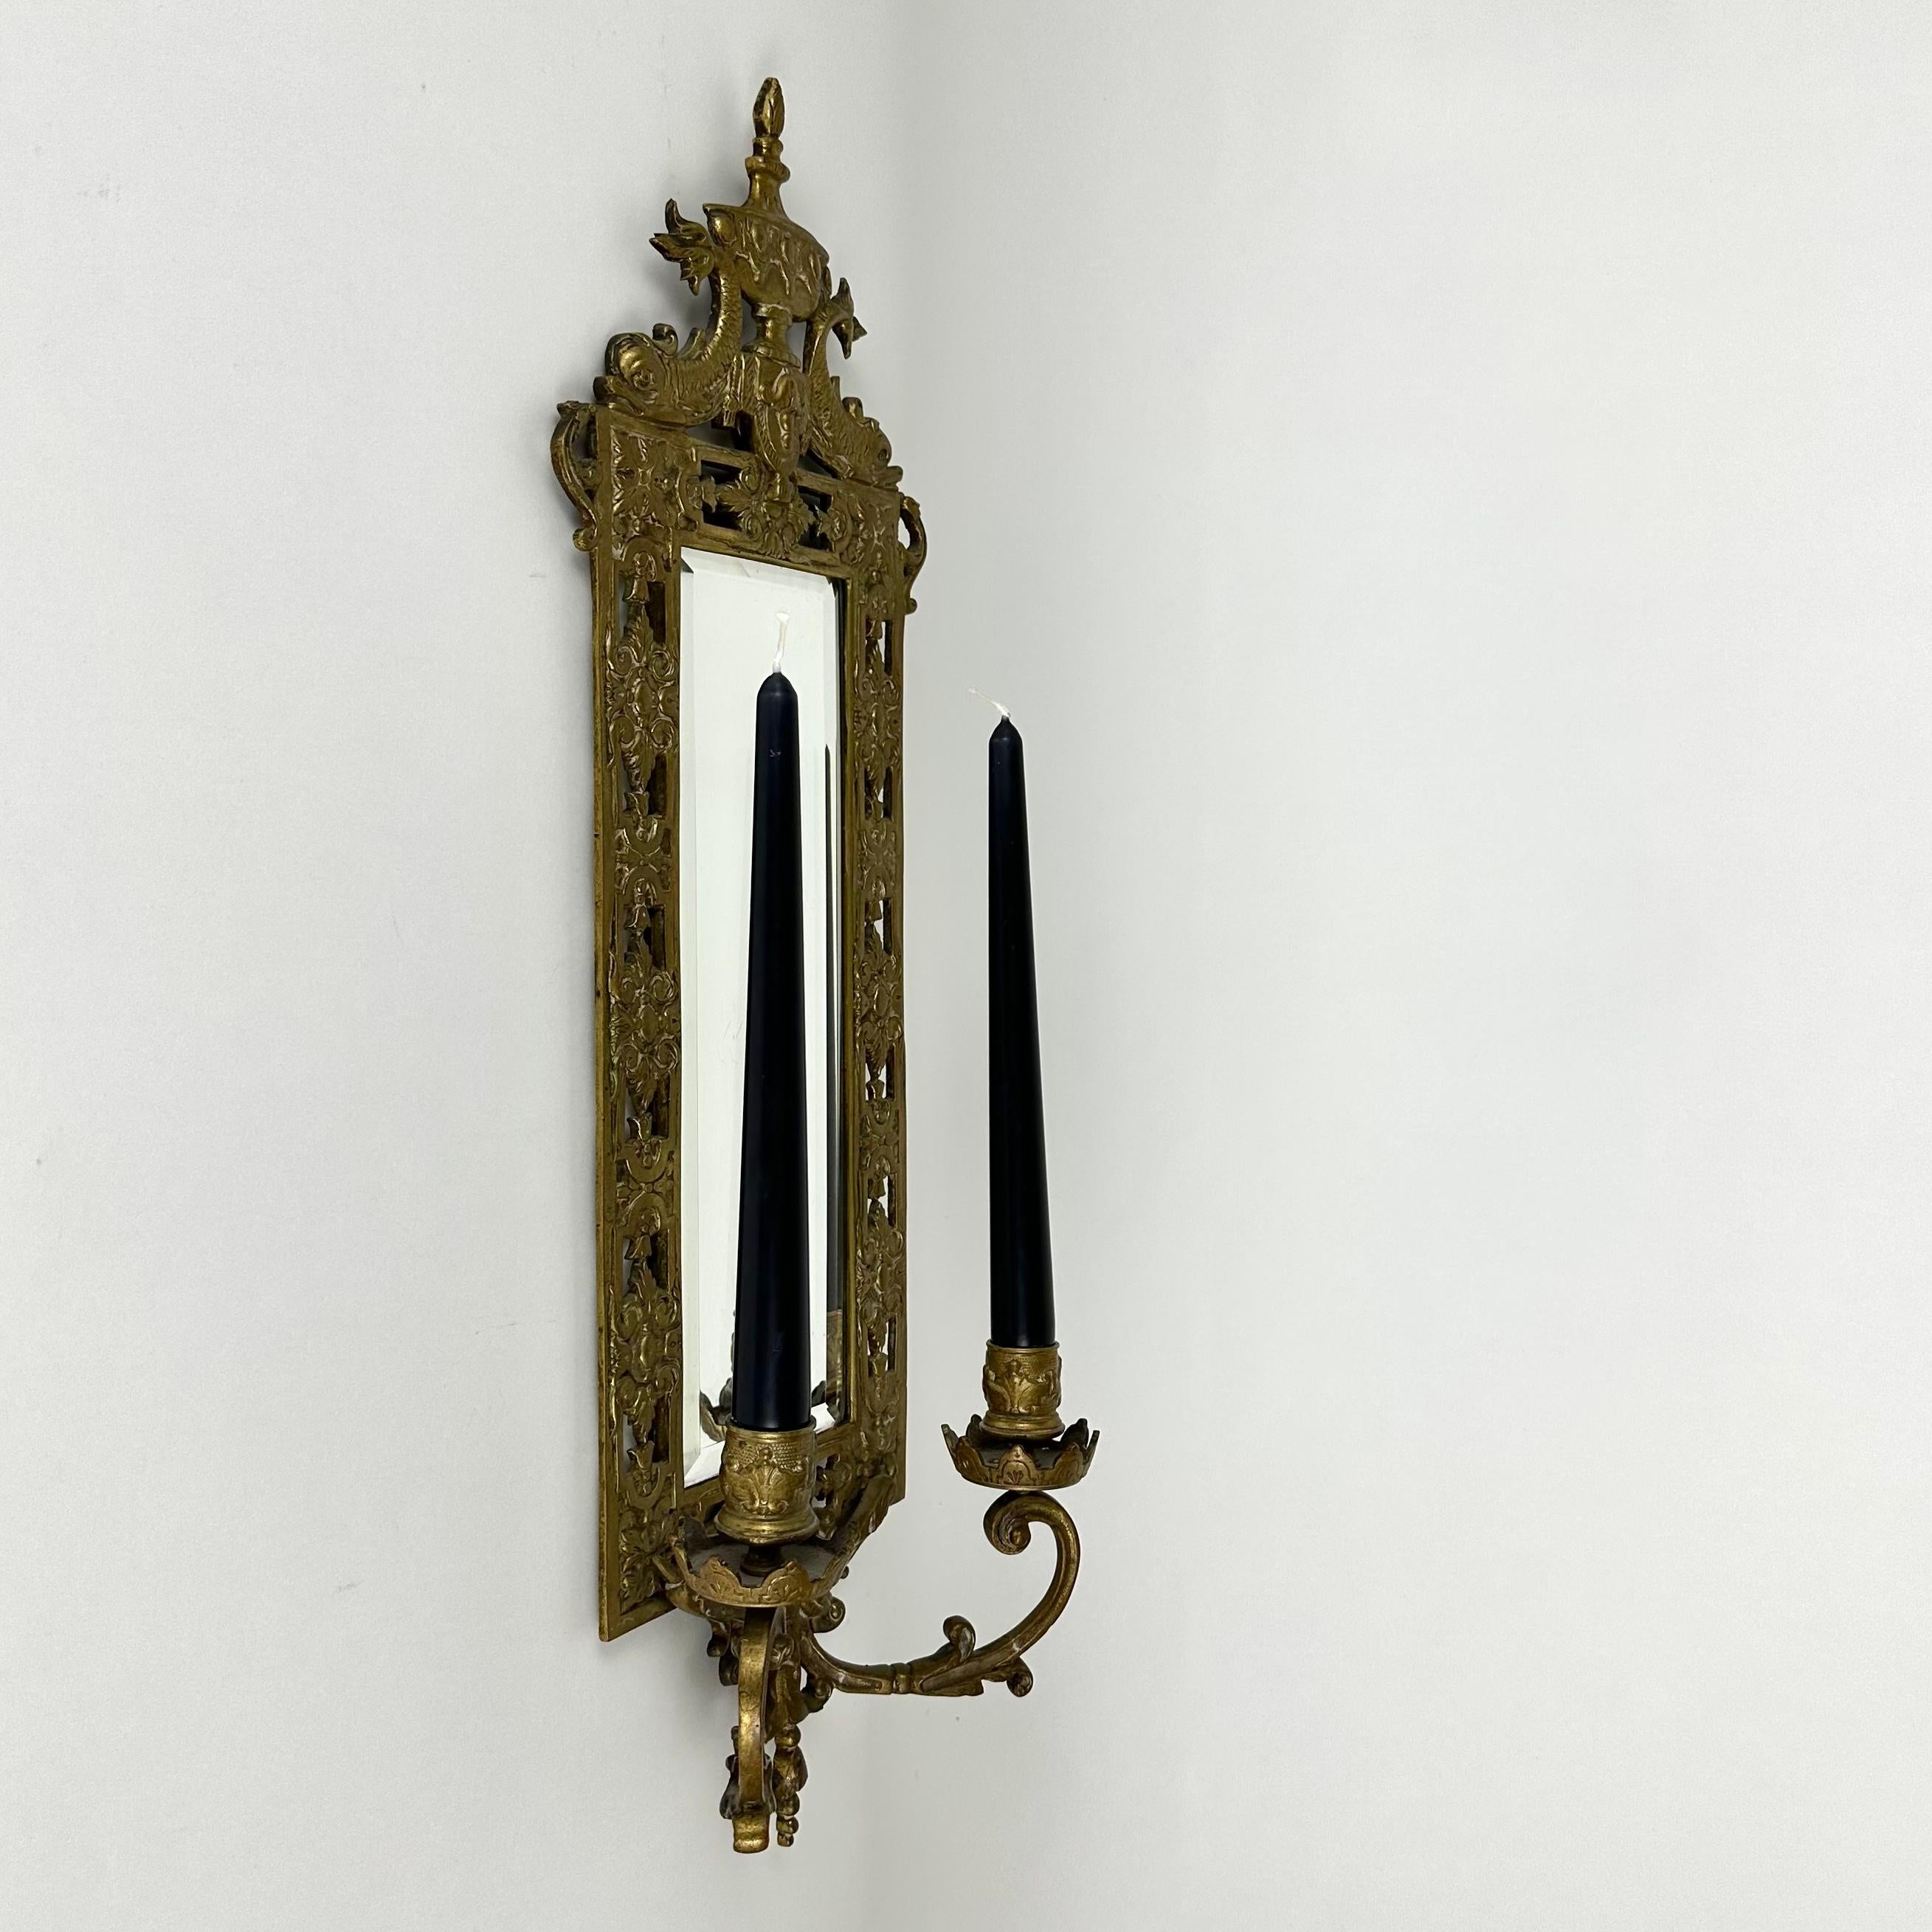 A classic mirrored sconce, rectangular in form. France, 1910s.

The top ornament features two classical dolphins.

Two arms at the bottom to hold taper candles.

The mirror is beveled, and has age spots in the original backing. The bronze has an